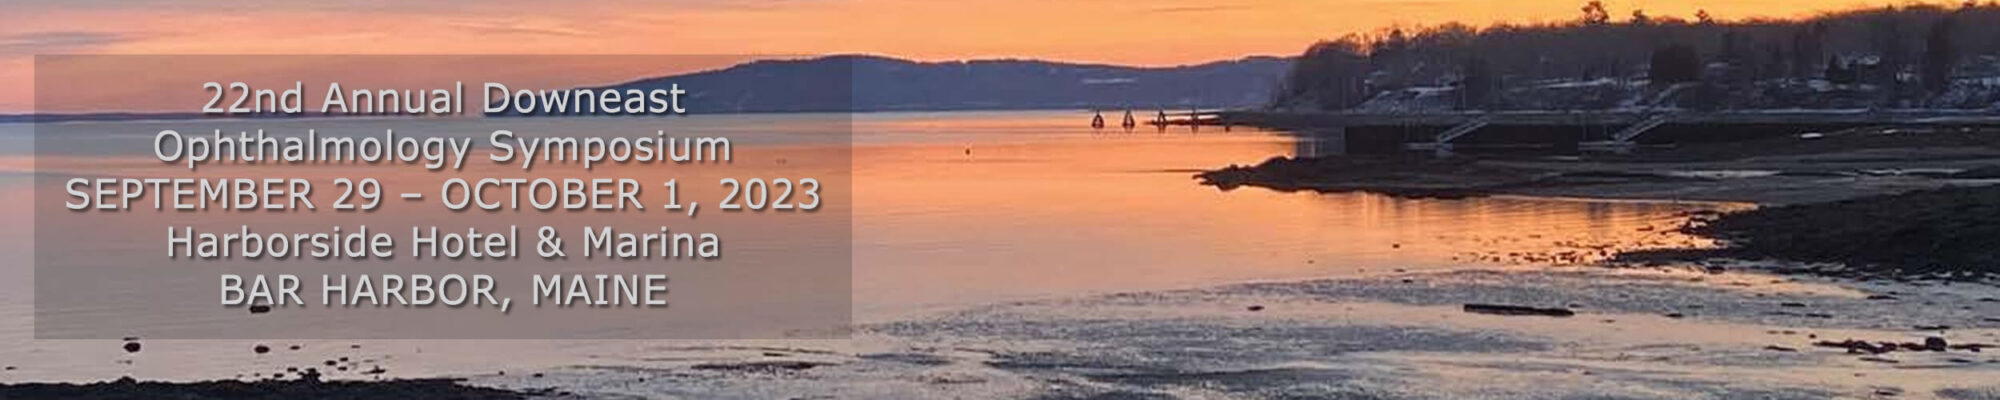 Save the date for the 22nd Annual Downeast Ophthalmology Symposium.